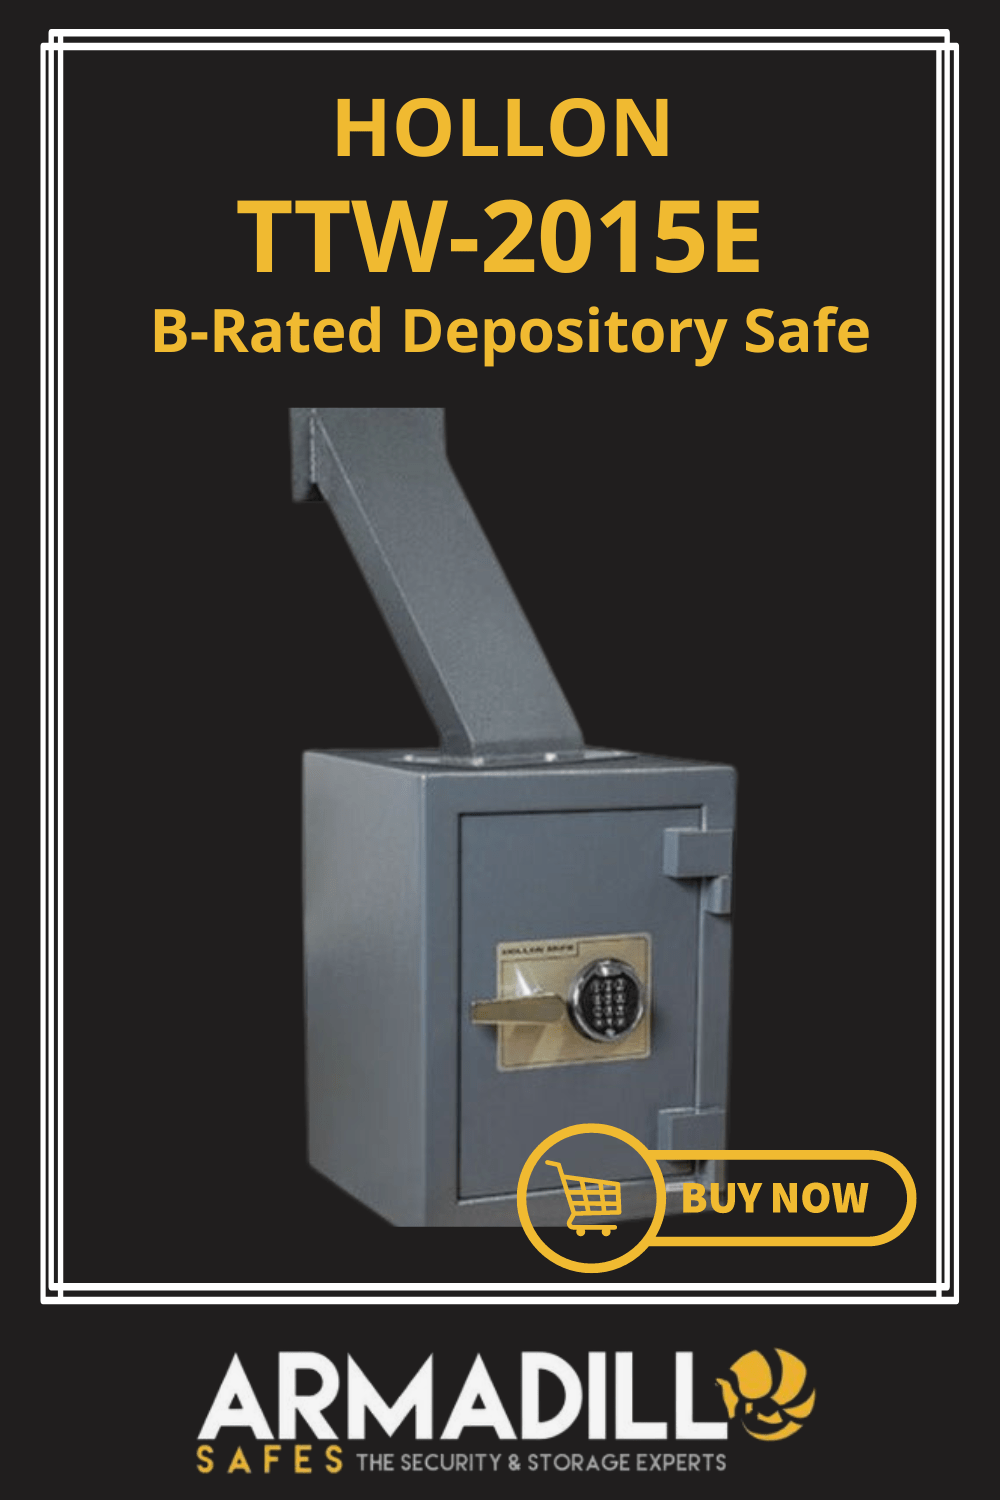 Hollon TTW-2015E B-Rated Depository Safe Armadillo Safe and Vault